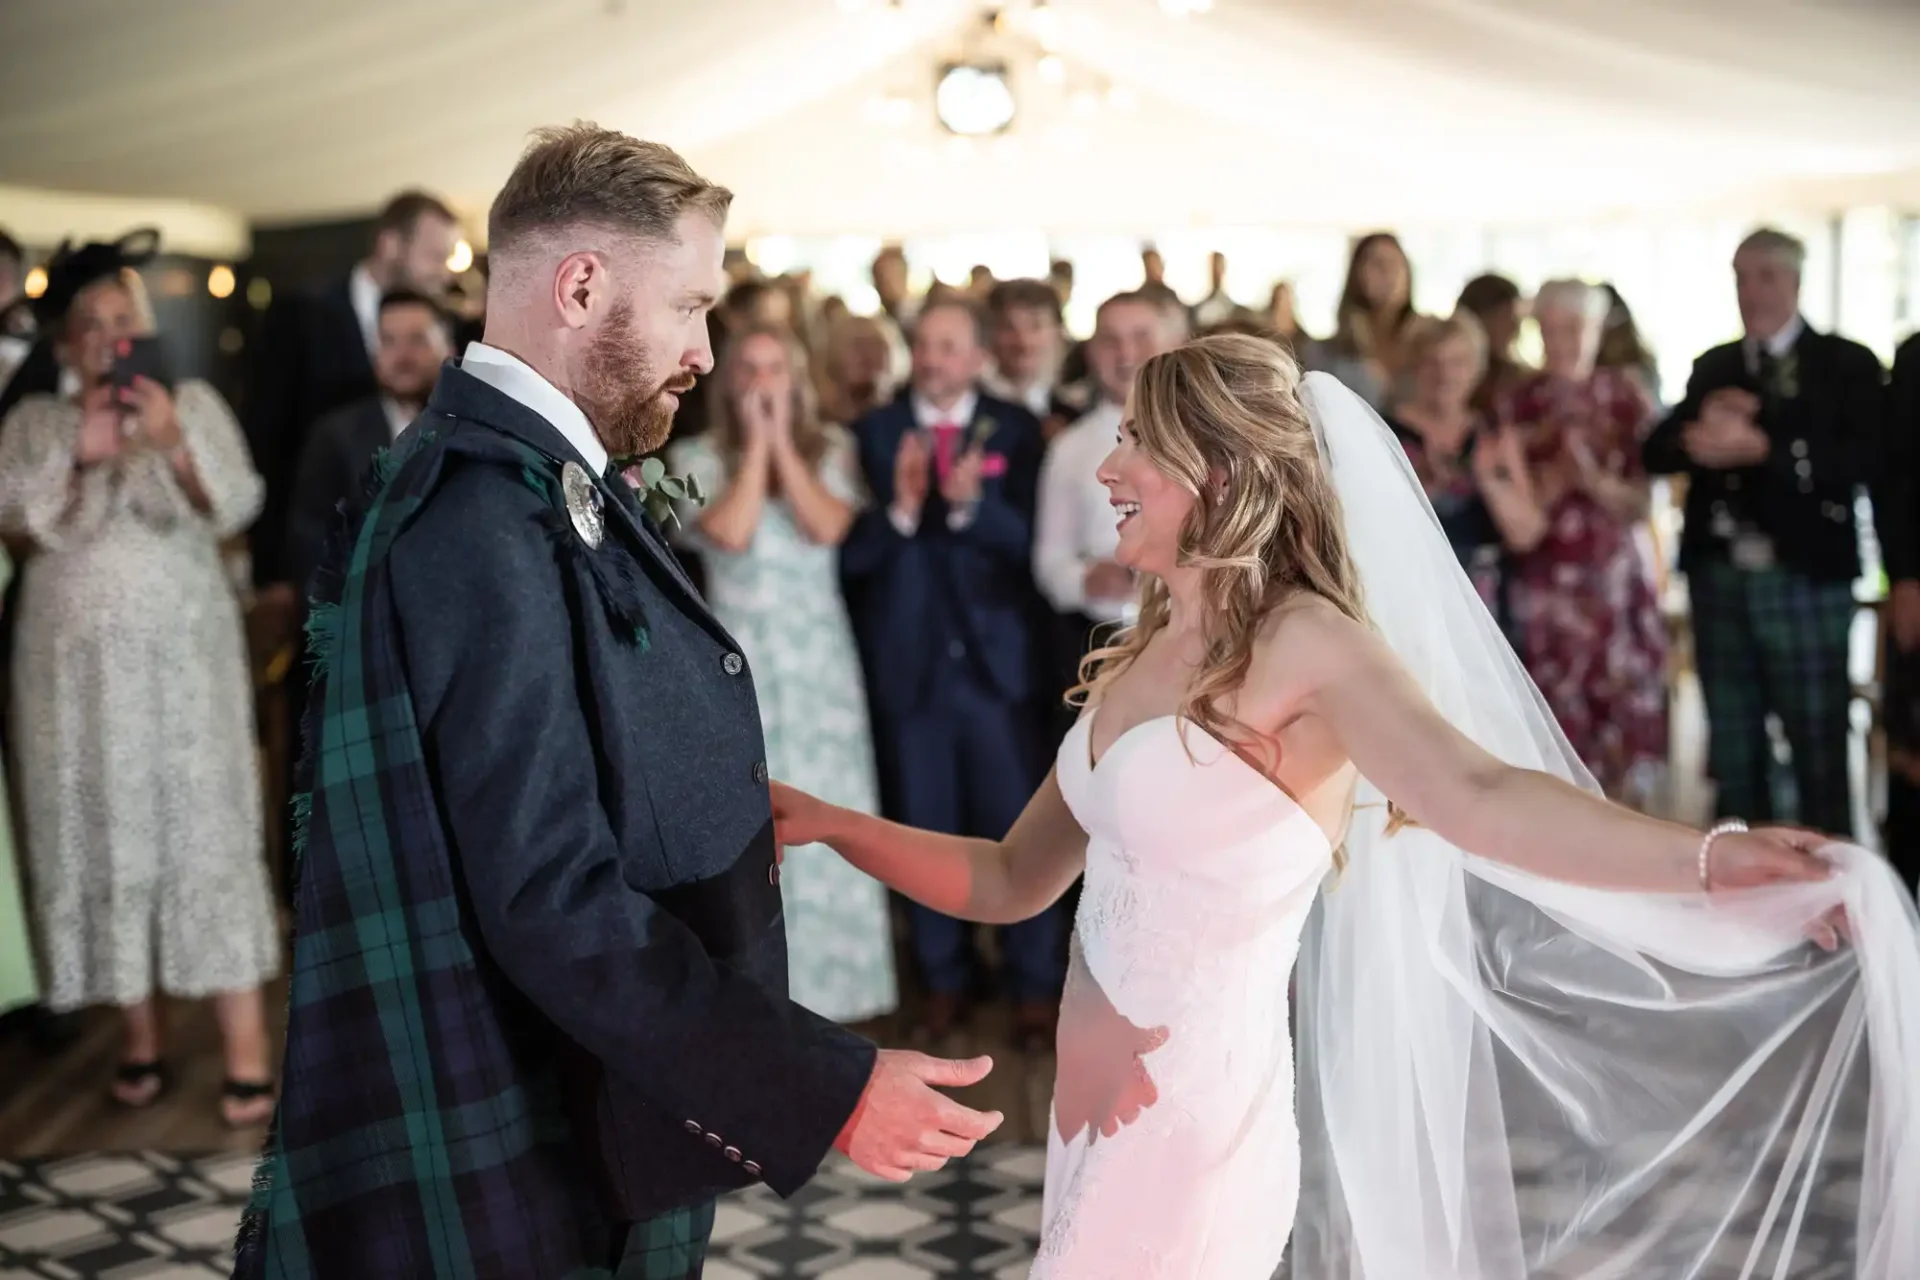 A bride in a white dress and a groom in a tartan kilt hold hands, smiling joyously, during a wedding ceremony with guests in the background.